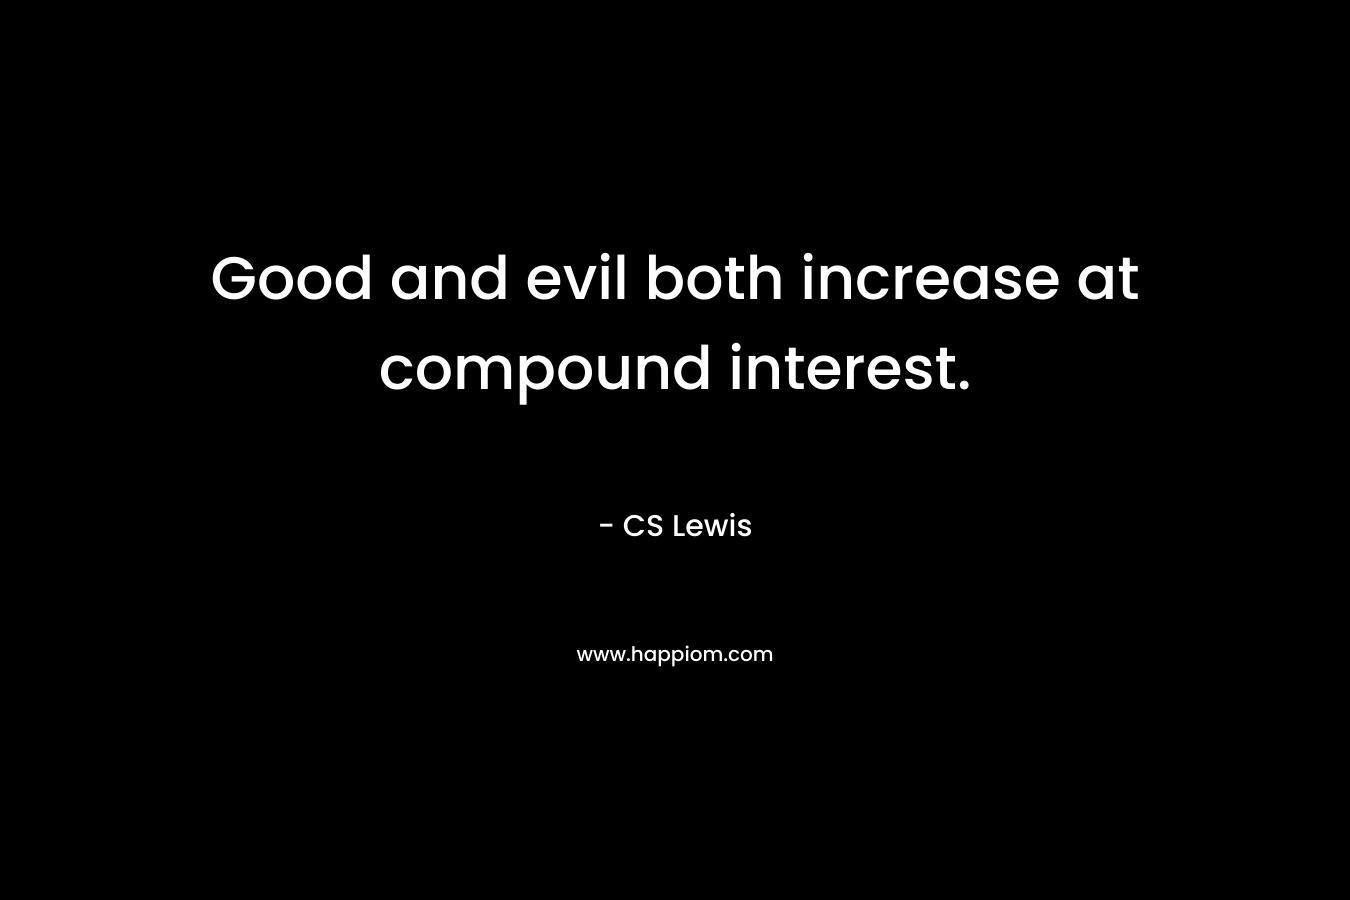 Good and evil both increase at compound interest.